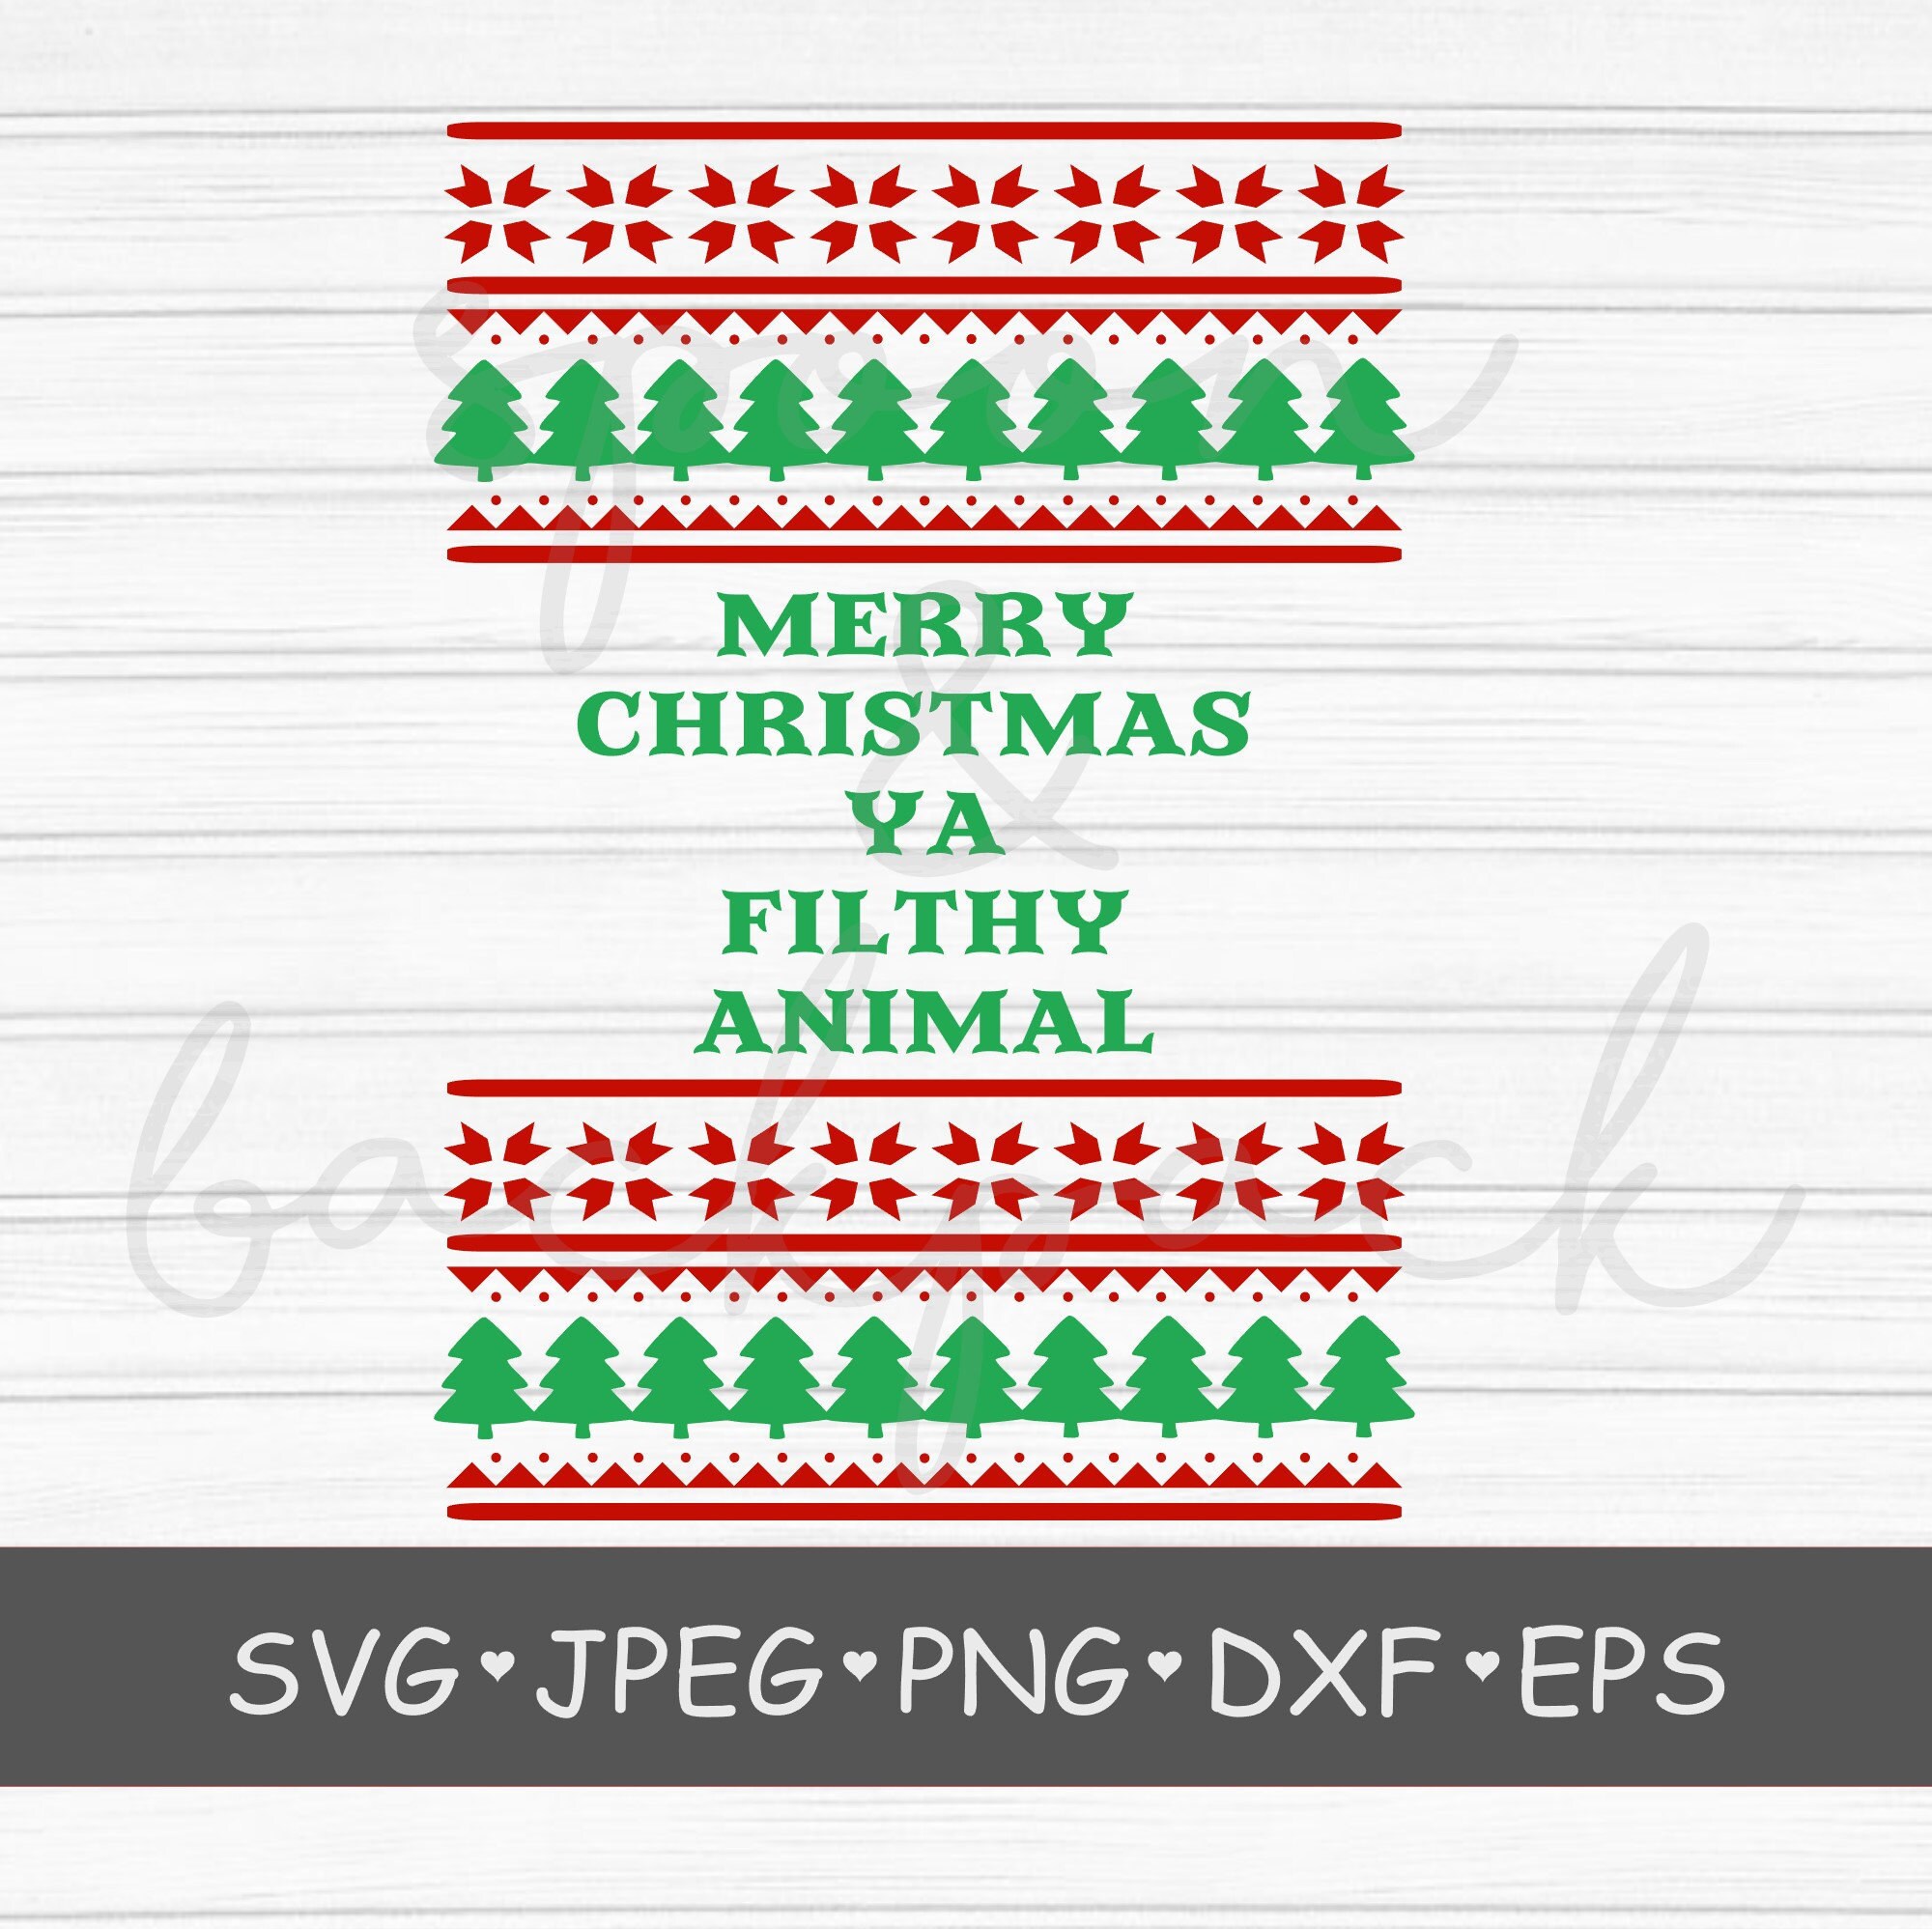 Download Merry Christmas ya filthy animal SVG home alone movie Svg ...